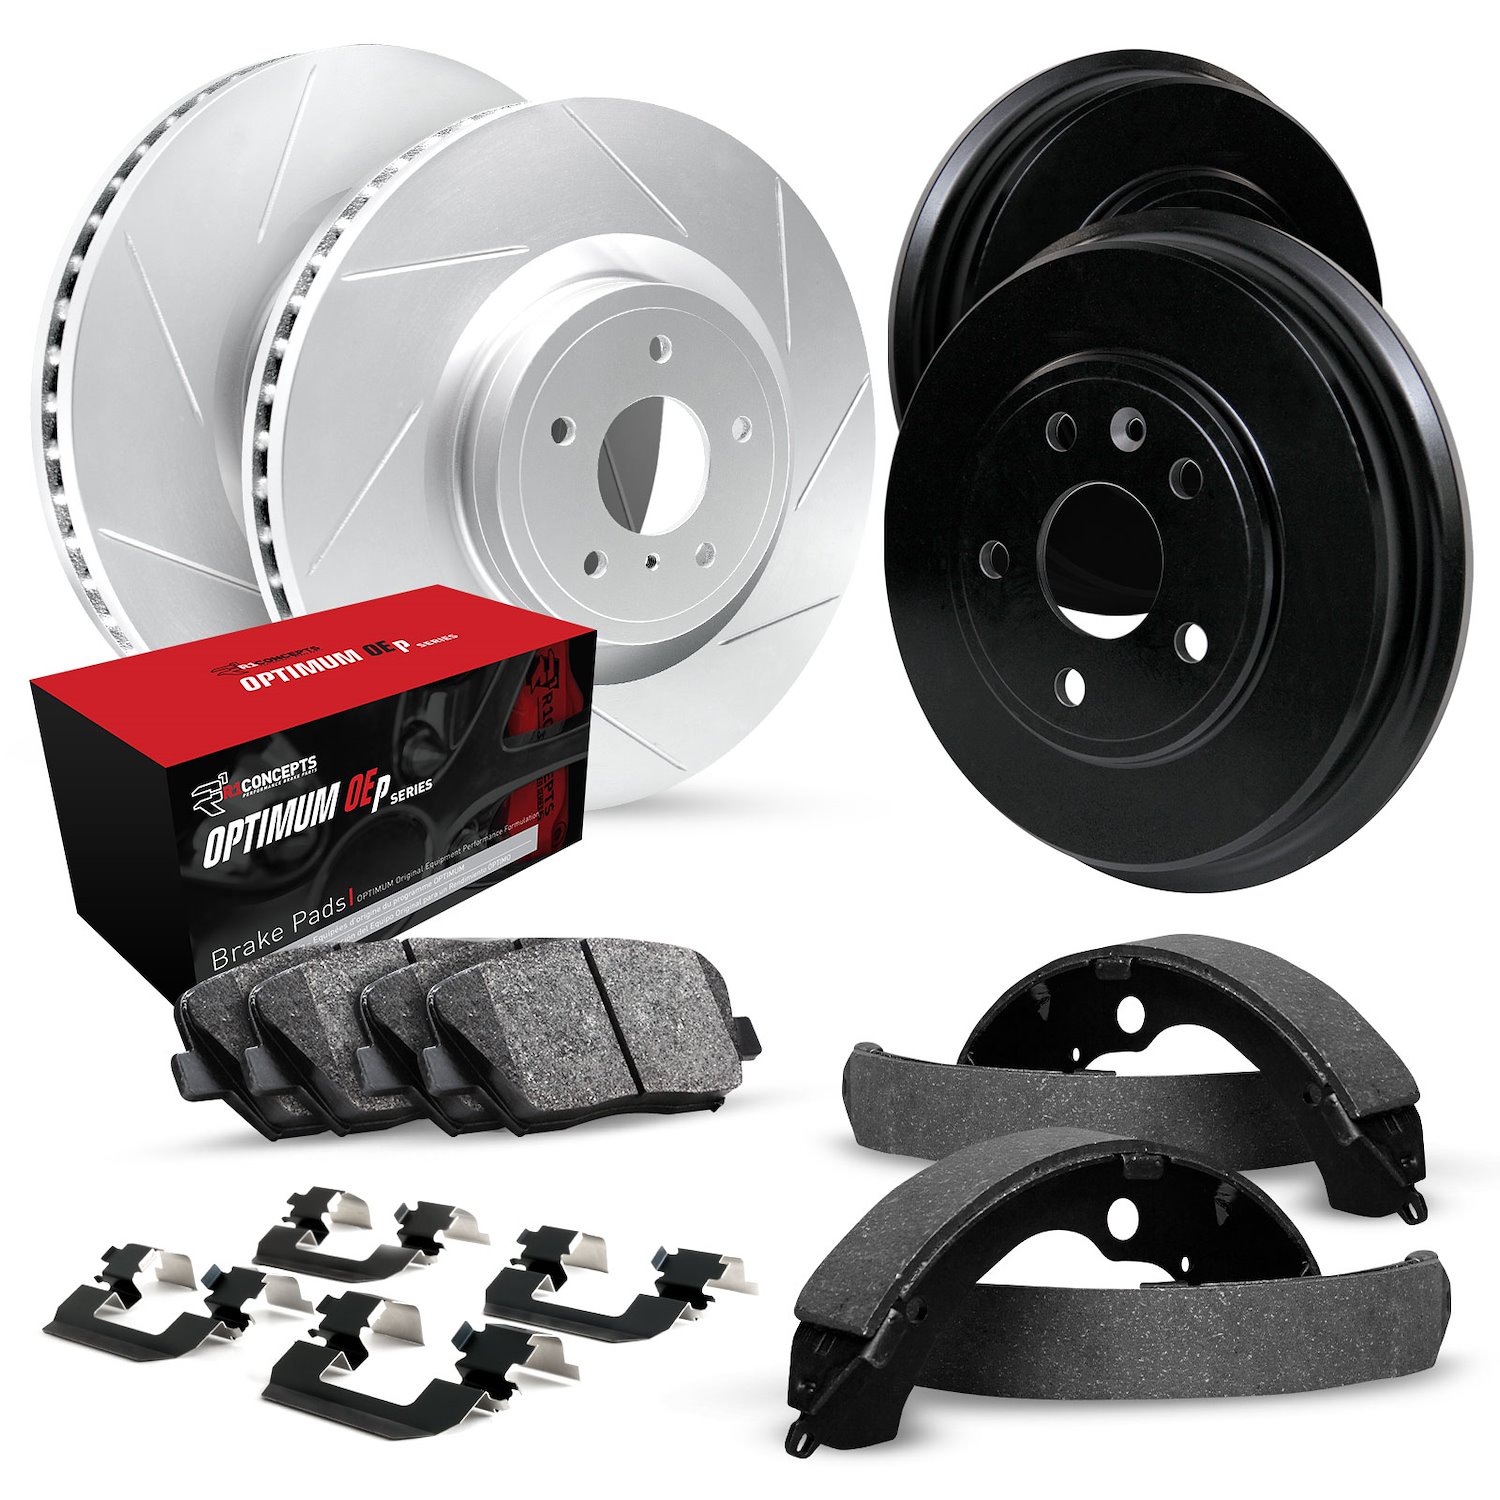 GEO-Carbon Slotted Brake Rotor & Drum Set w/Optimum OE Pads, Shoes, & Hardware, 1992-1996 Ford/Lincoln/Mercury/Mazda